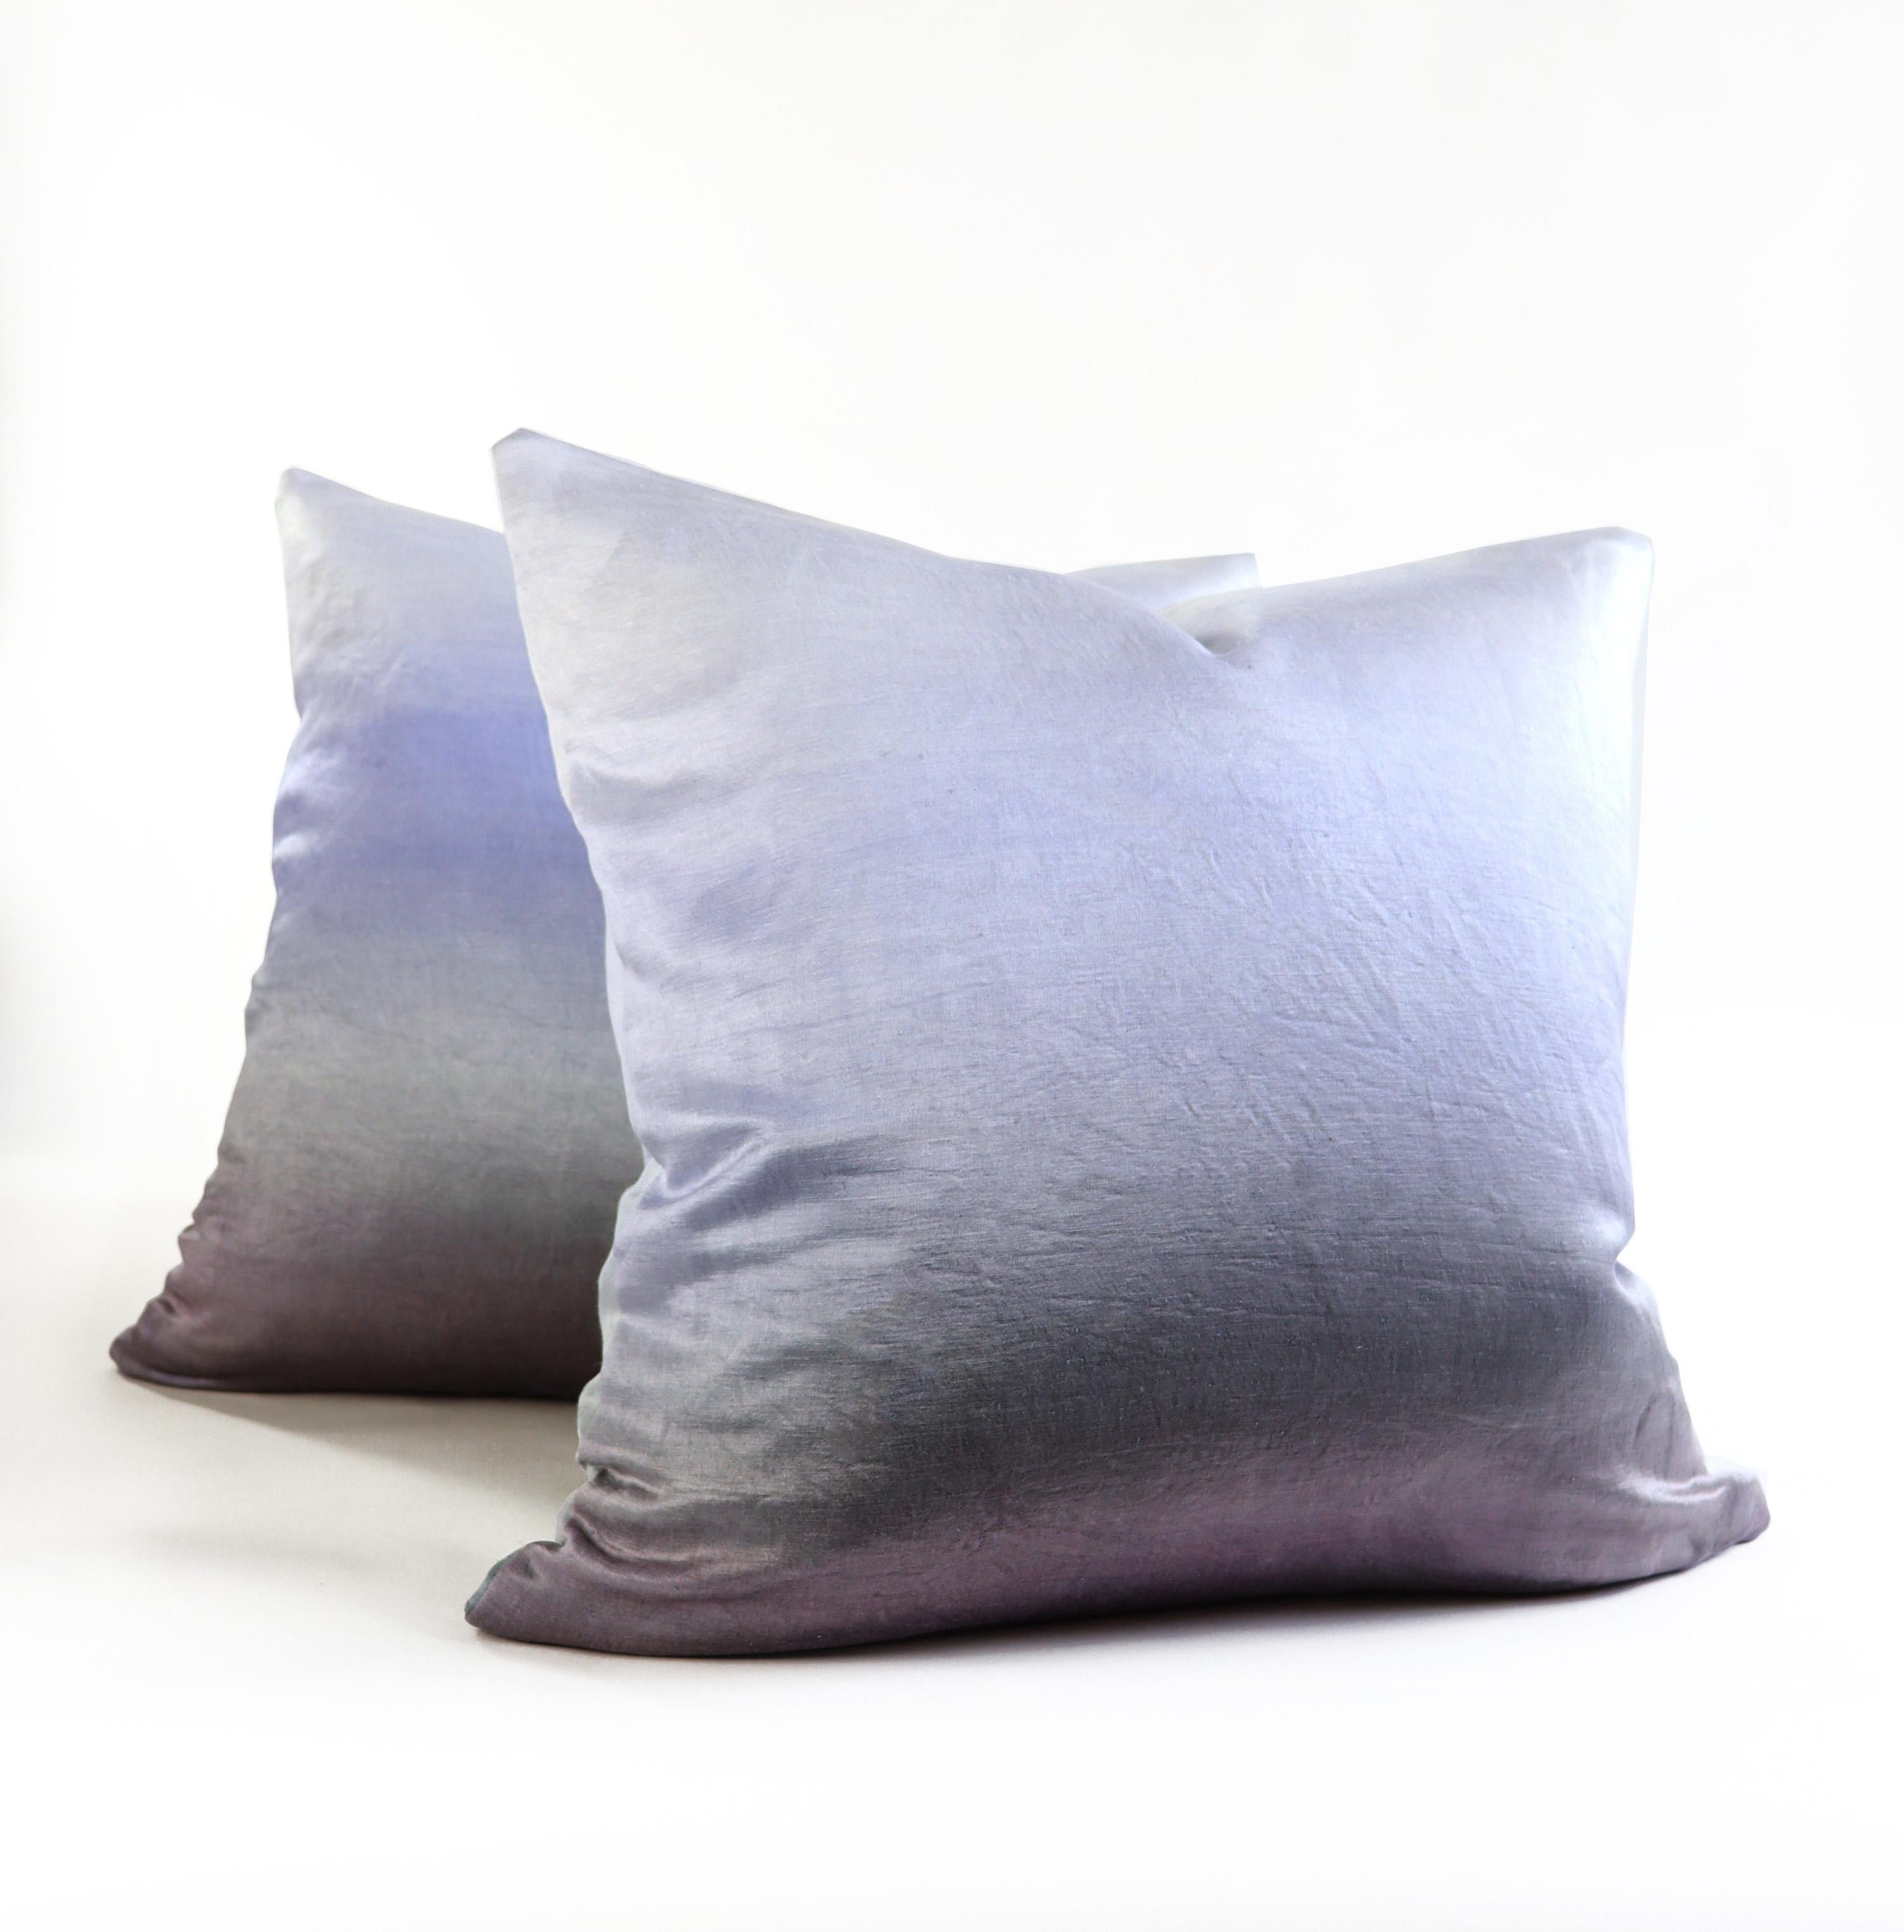 Each side of this lustrous throw pillow is hand dyed in our Brooklyn studio, applied using large brushes to create exceptional color gradients. The fabric is 60% hemp and 40% silk. Hemp is a quick growing crop which does not require pesticides and